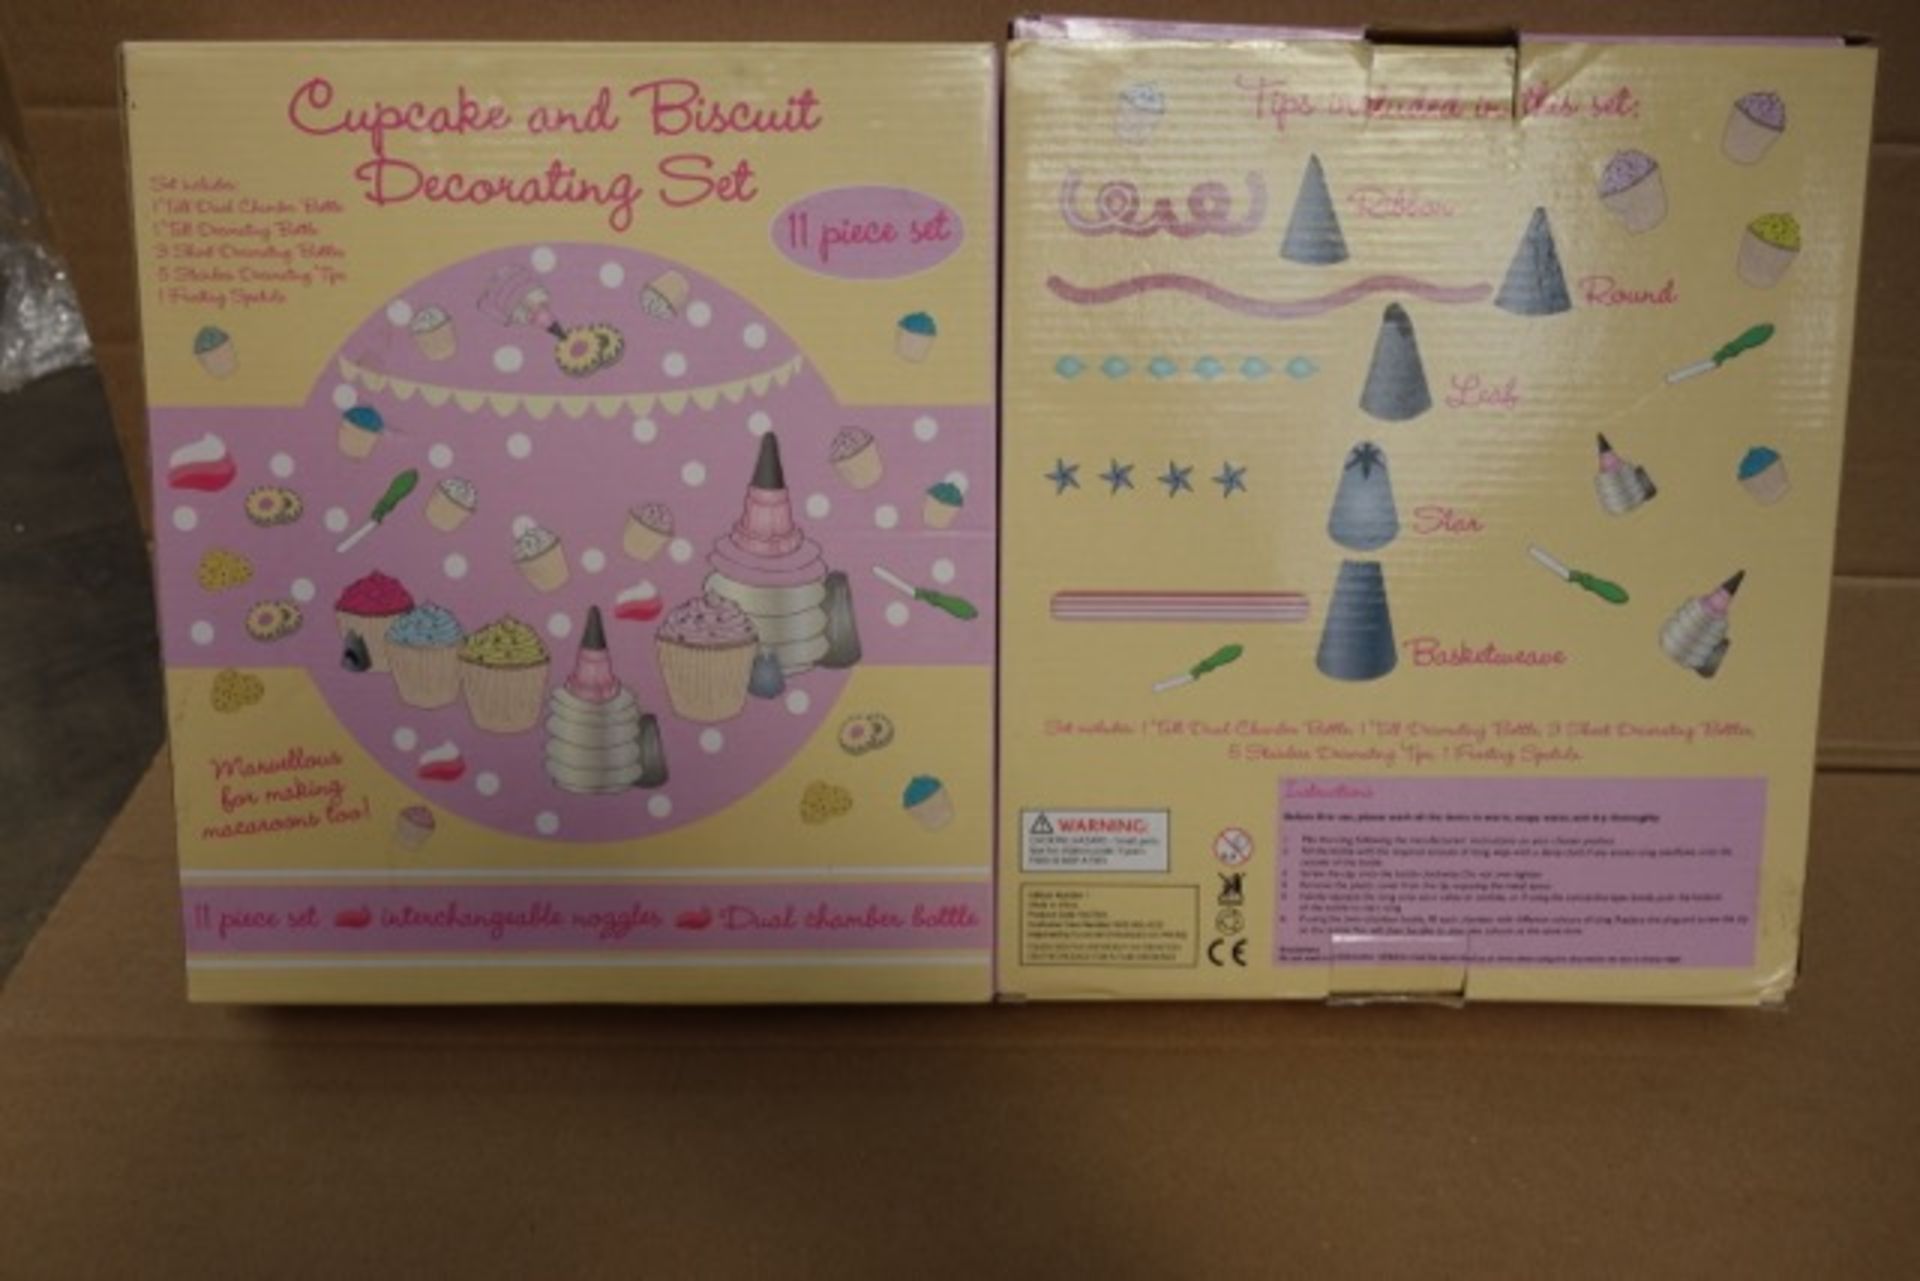 48 x Cupcake and Biscuit Decorating Set. 11 Piece Set. Each Set Includes: 1 tall dual chamber